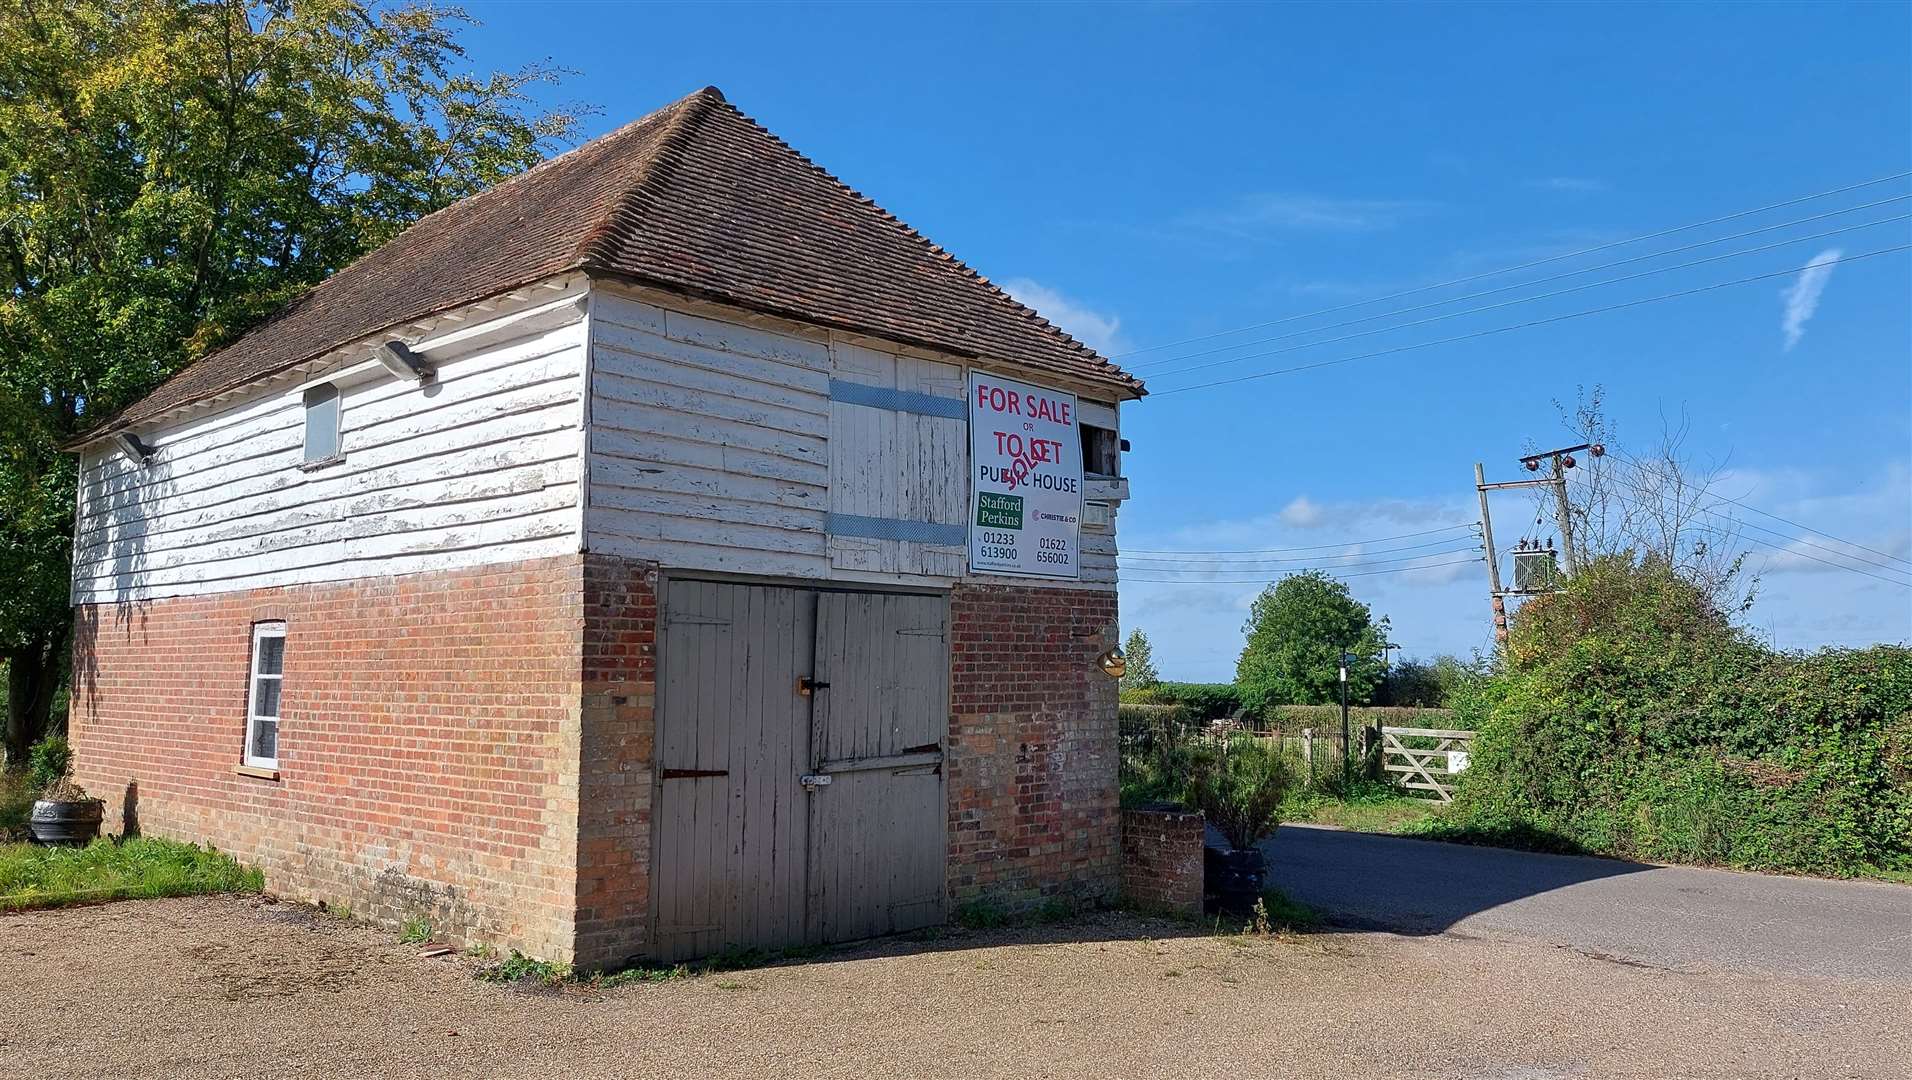 The former coach house will be used as a classic car workshop for the time being